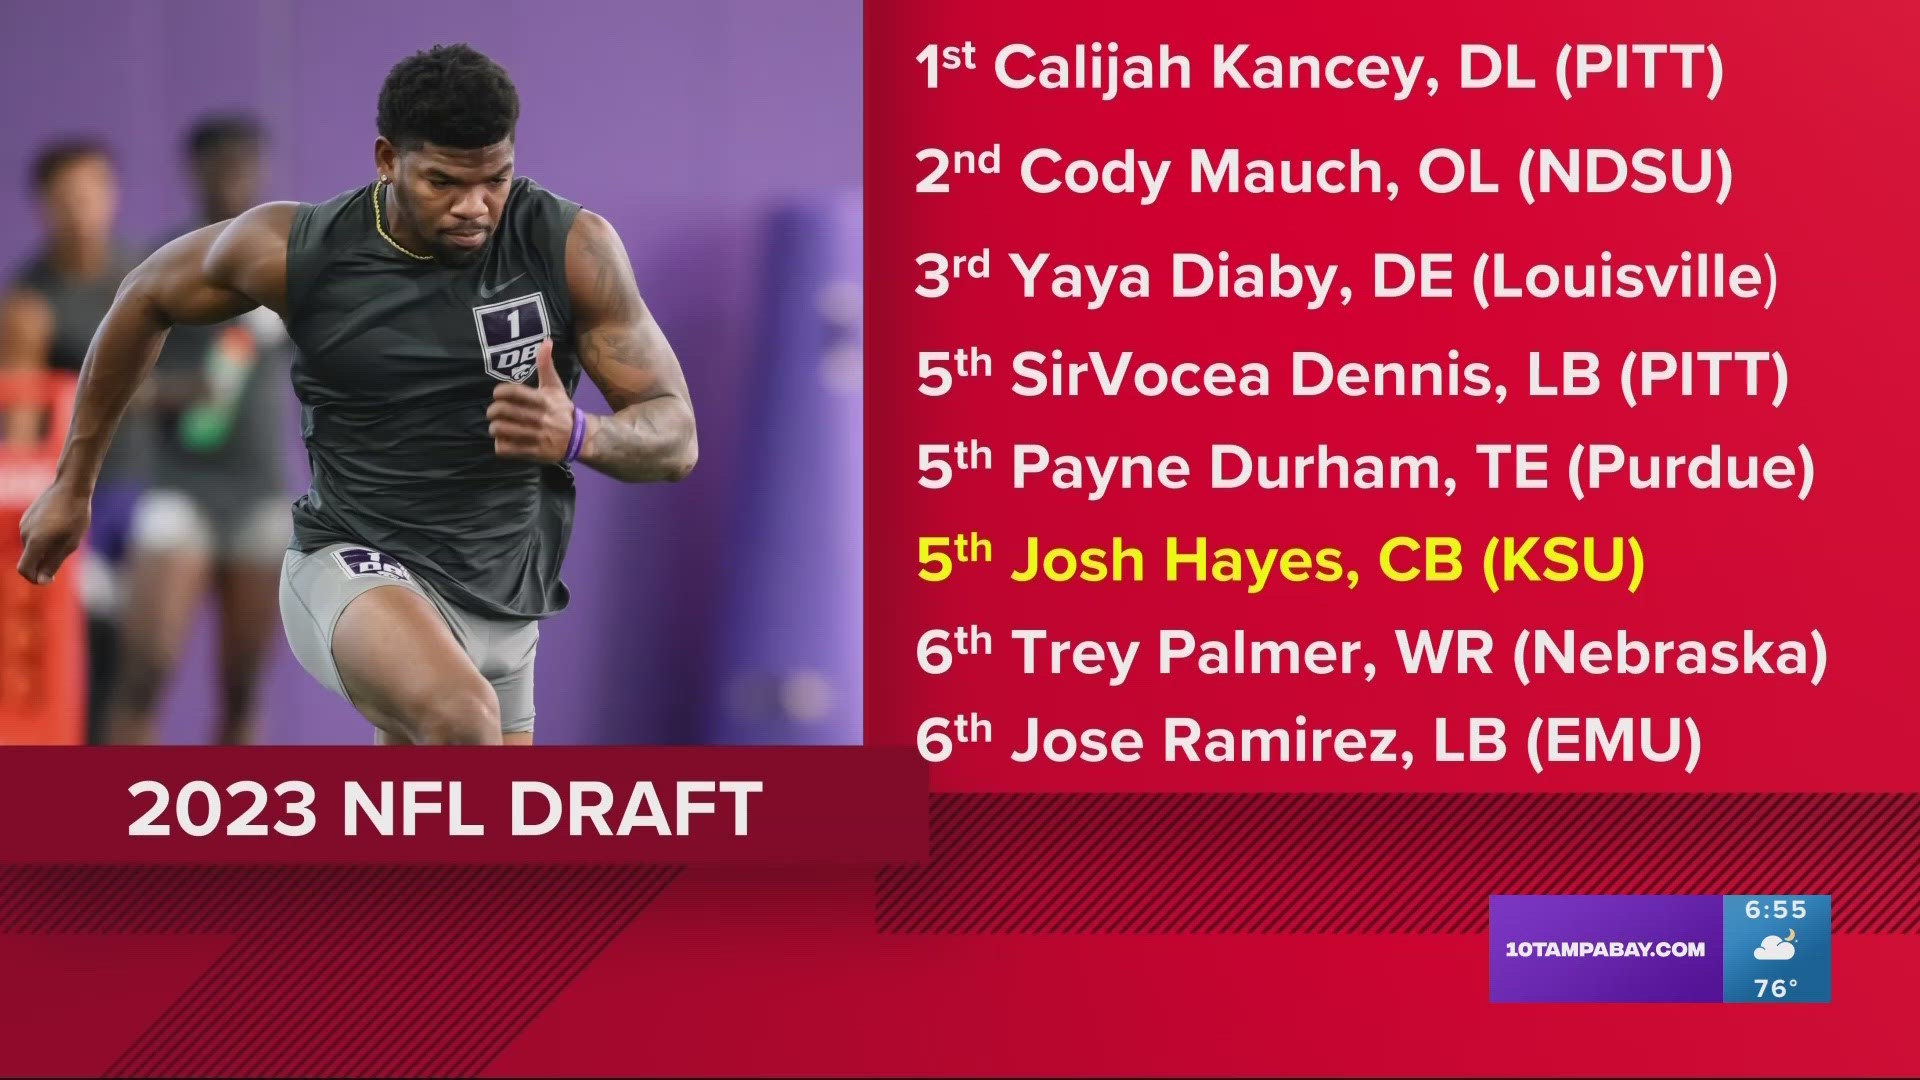 Buccaneers welcome 5 new players in last round of NFL Draft